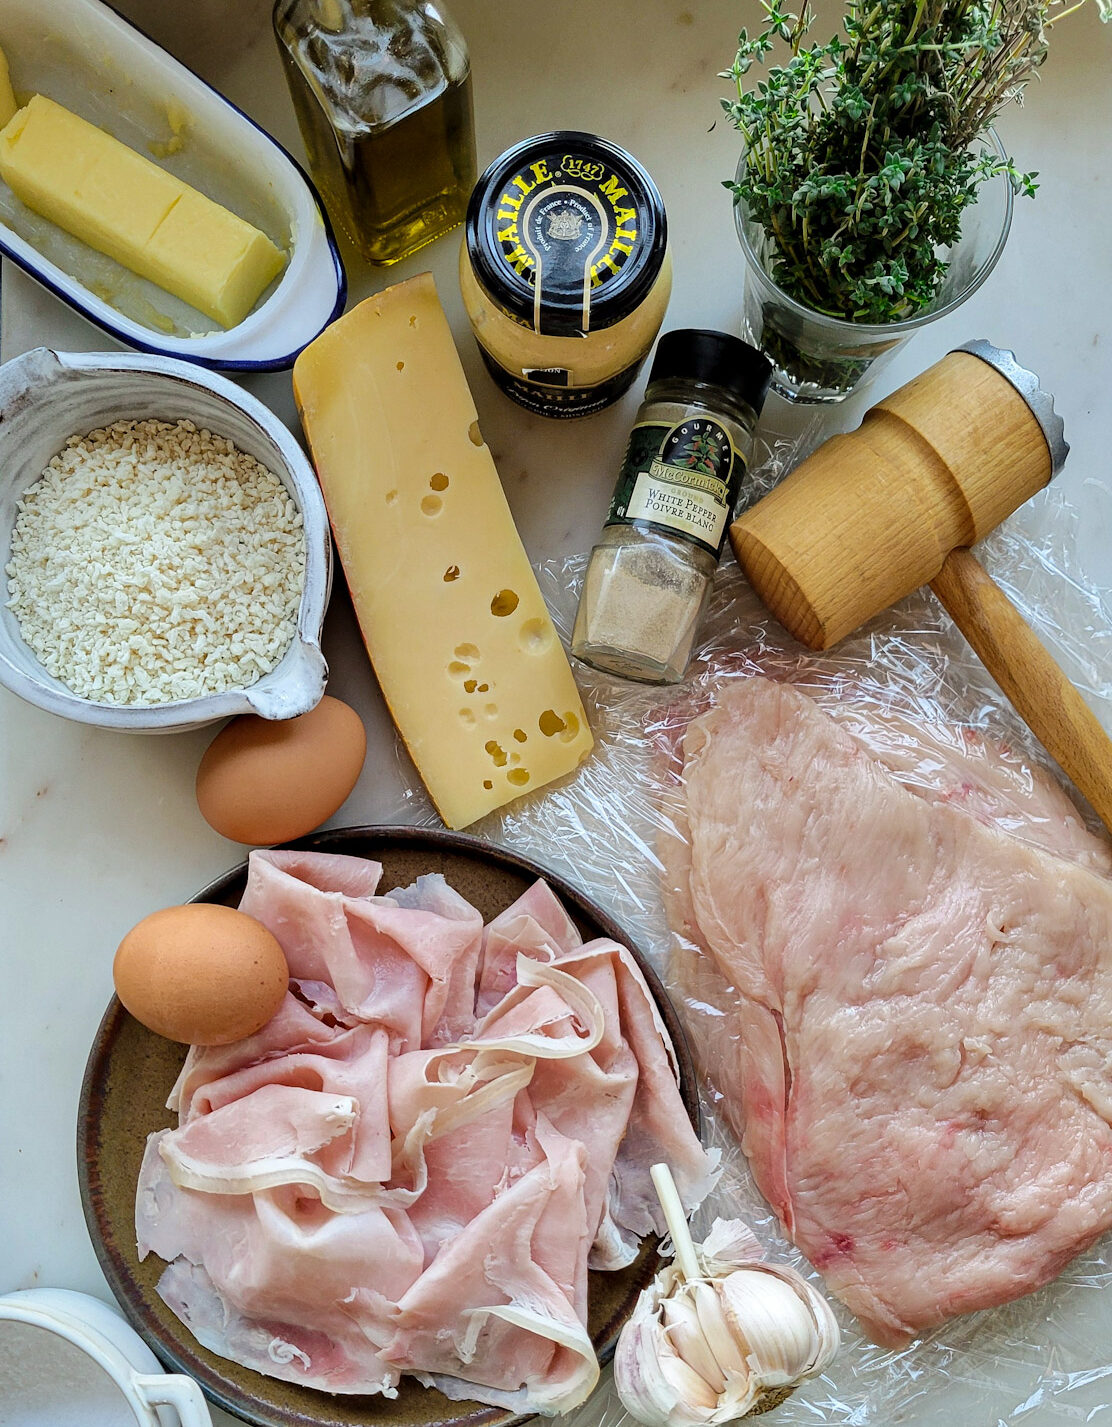 Ingredients needed to make Chicken Cordon Bleu are set out on the counter/